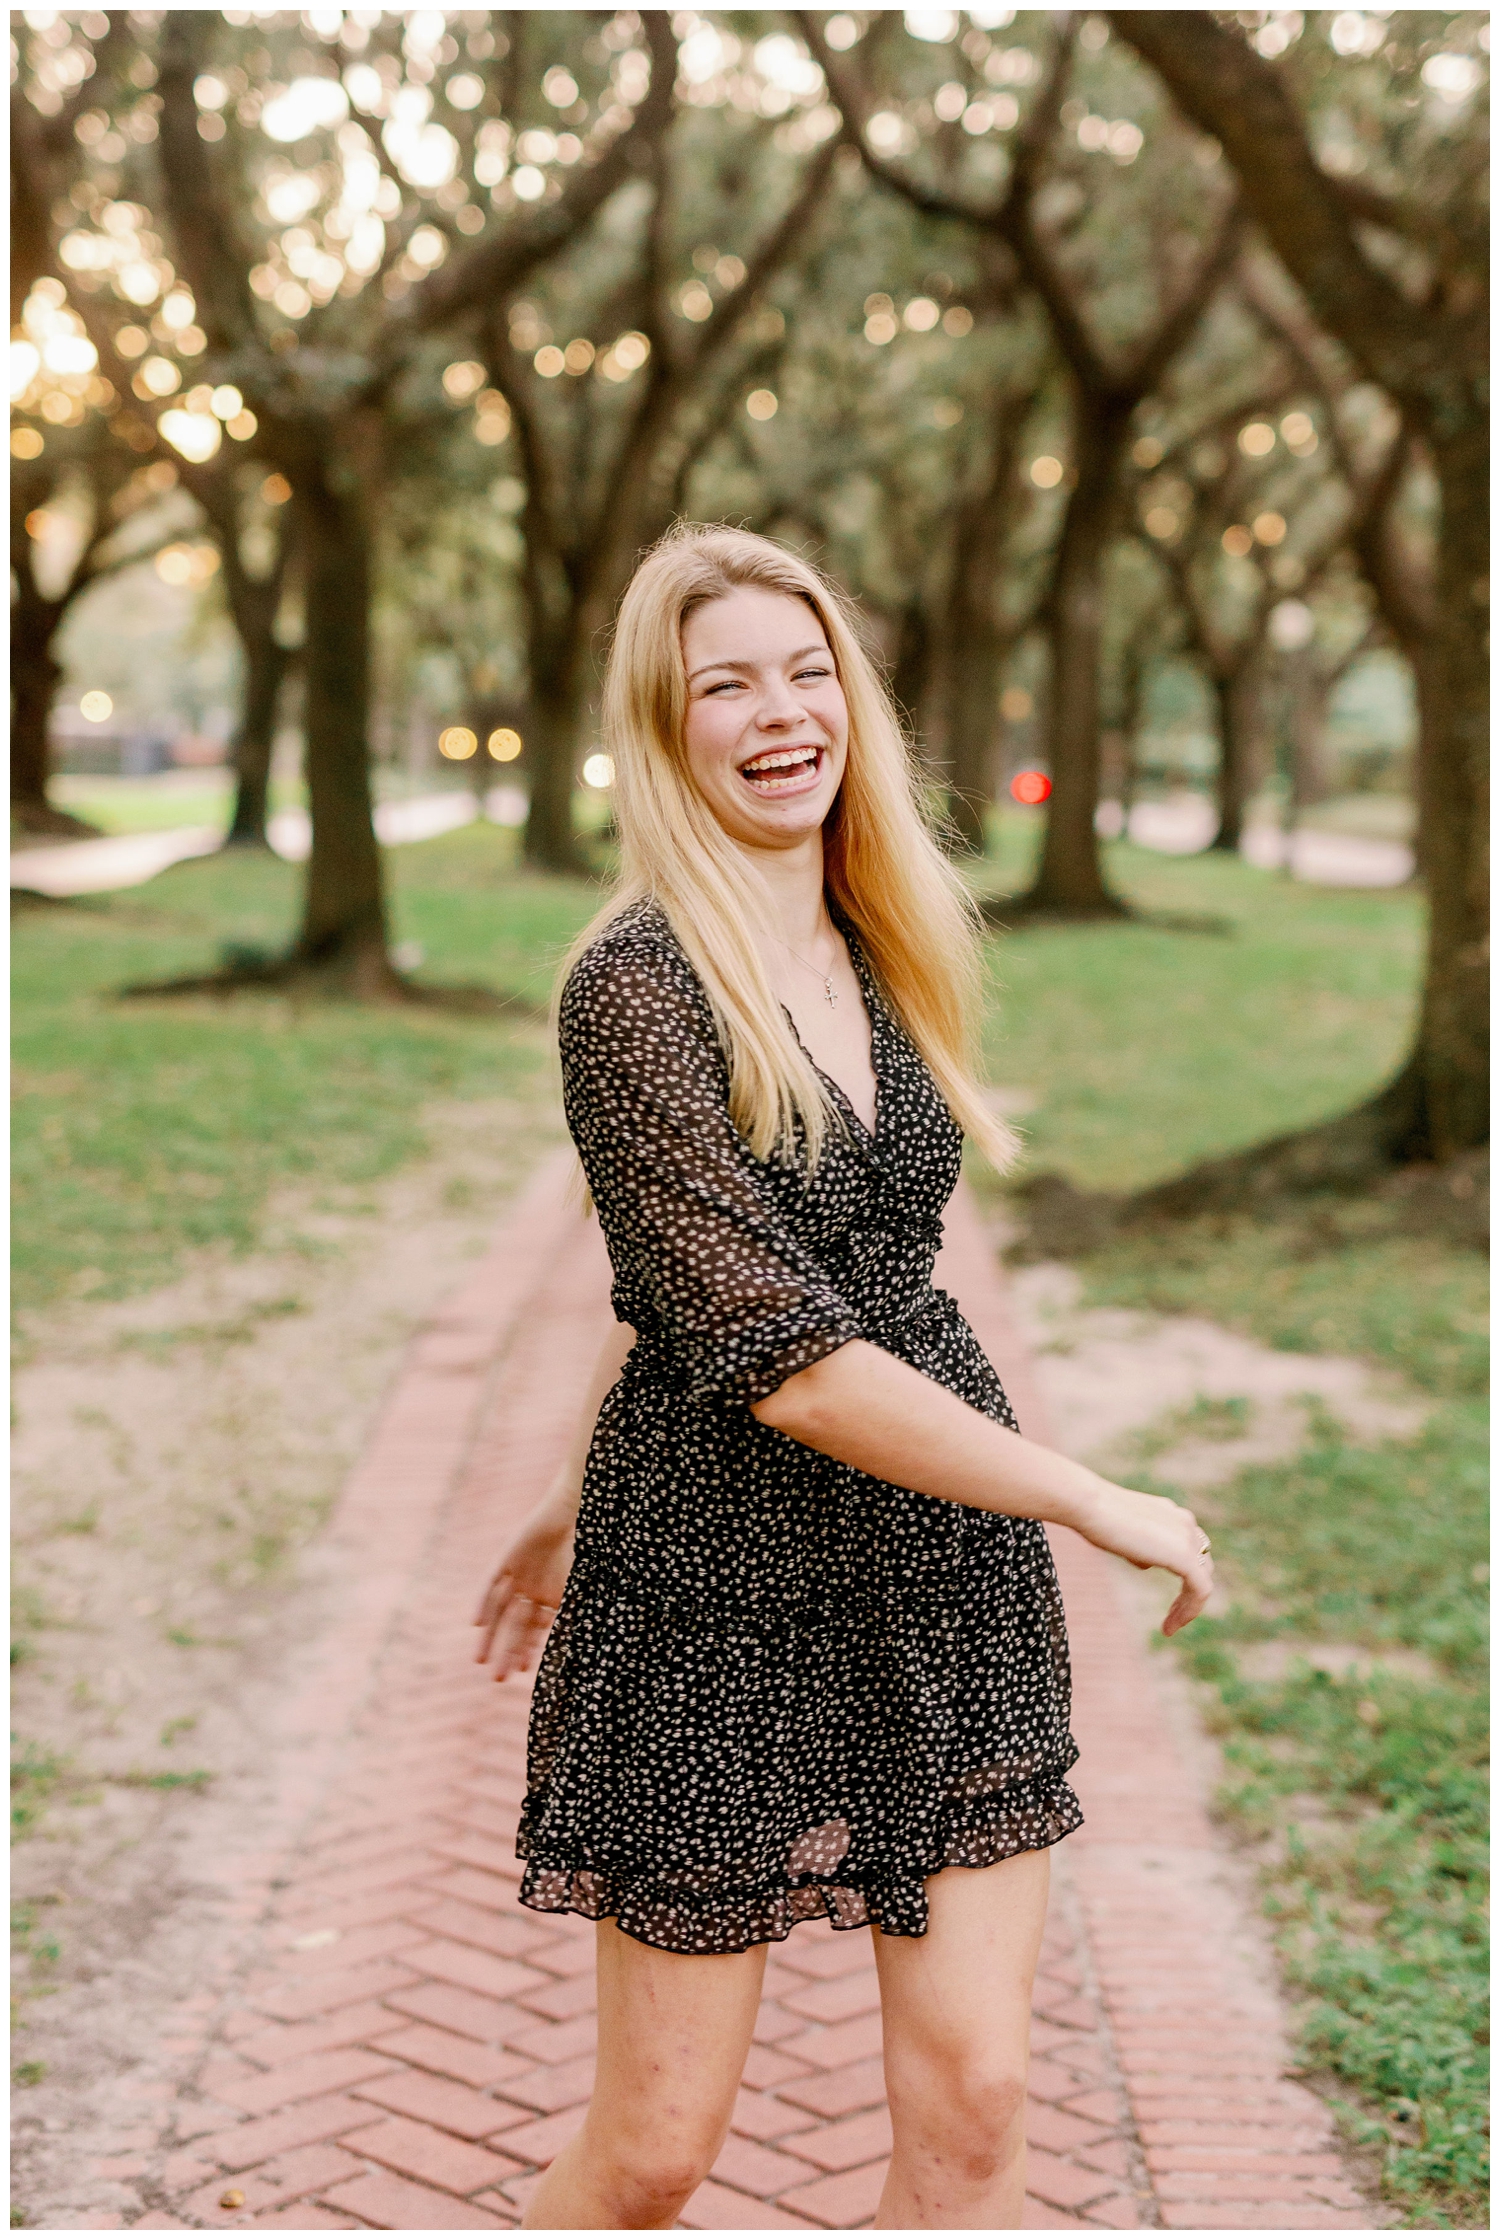 Senior Pictures South Boulevard with girl in black dress laughing and twirling